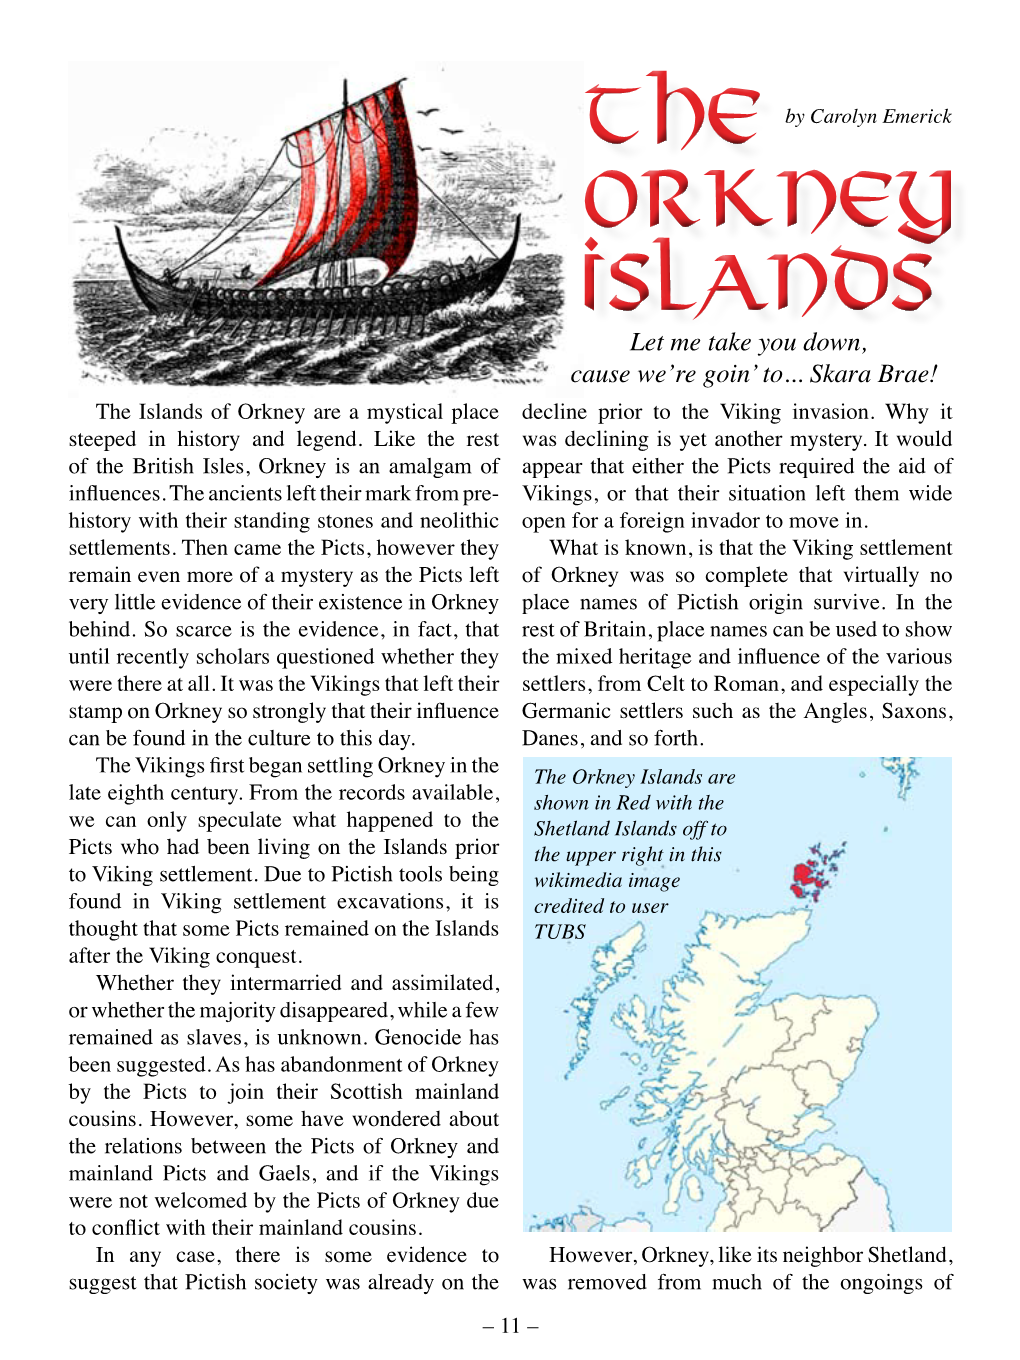 The Orkney Islands the Orkney Islands